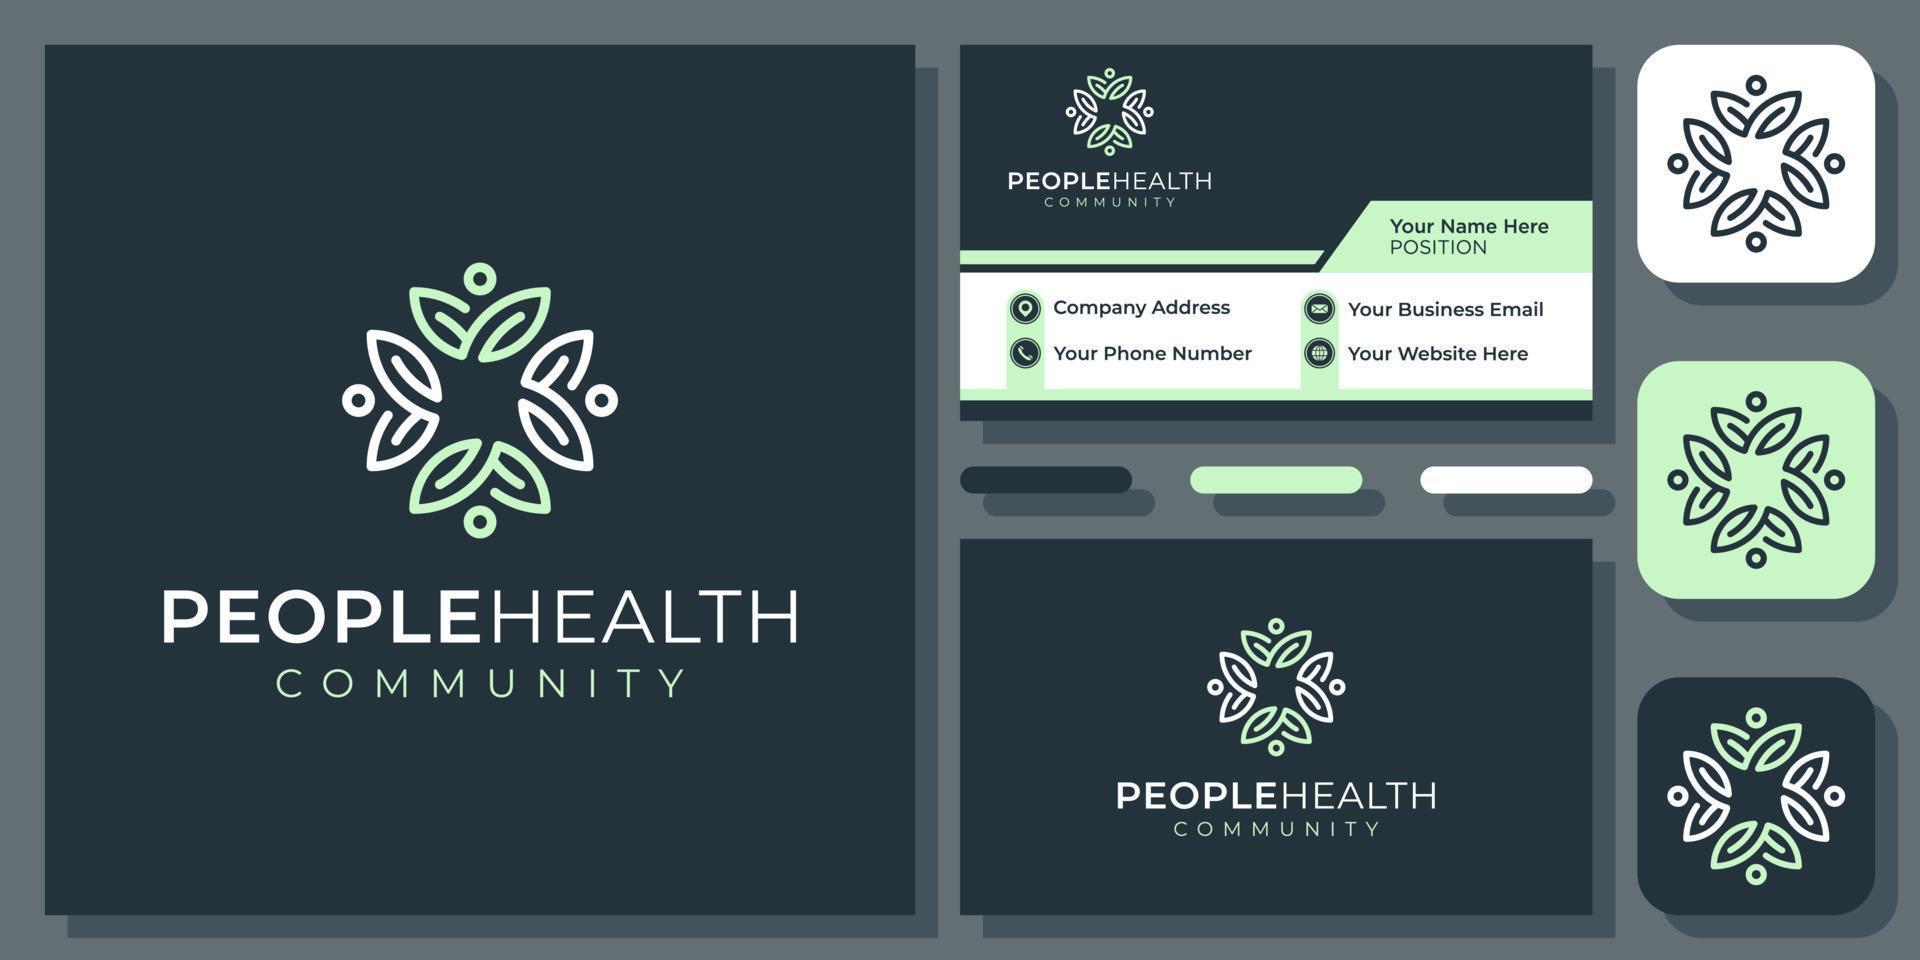 People Leaf Health Community Family Healthcare Nature Ornate Vector Logo Design with Business Card